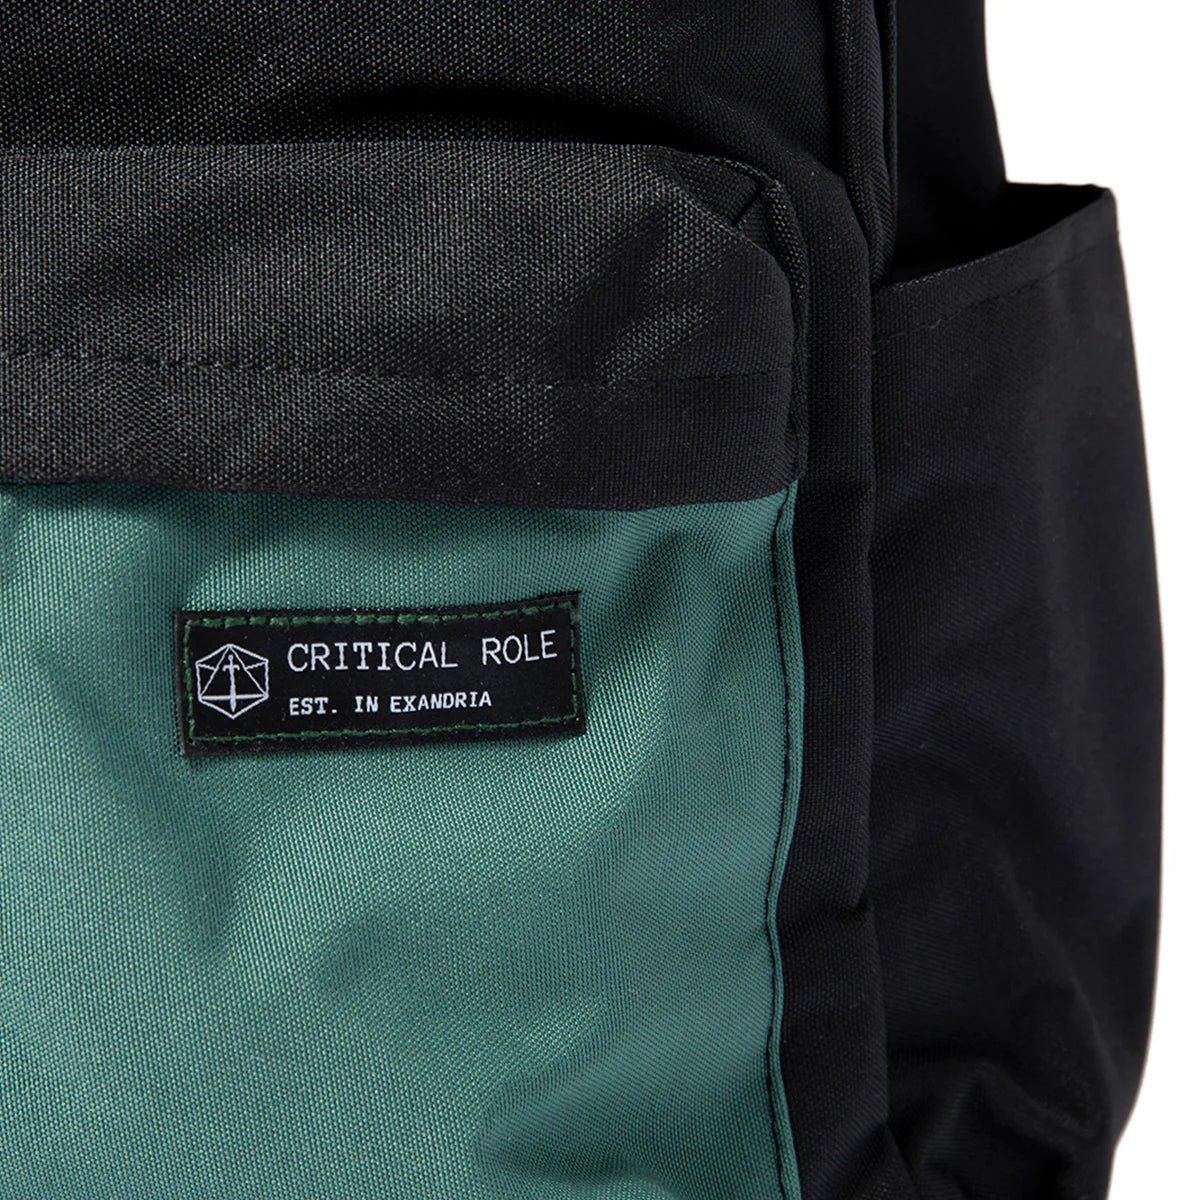 Critical Role Backpack - The Fourth Place